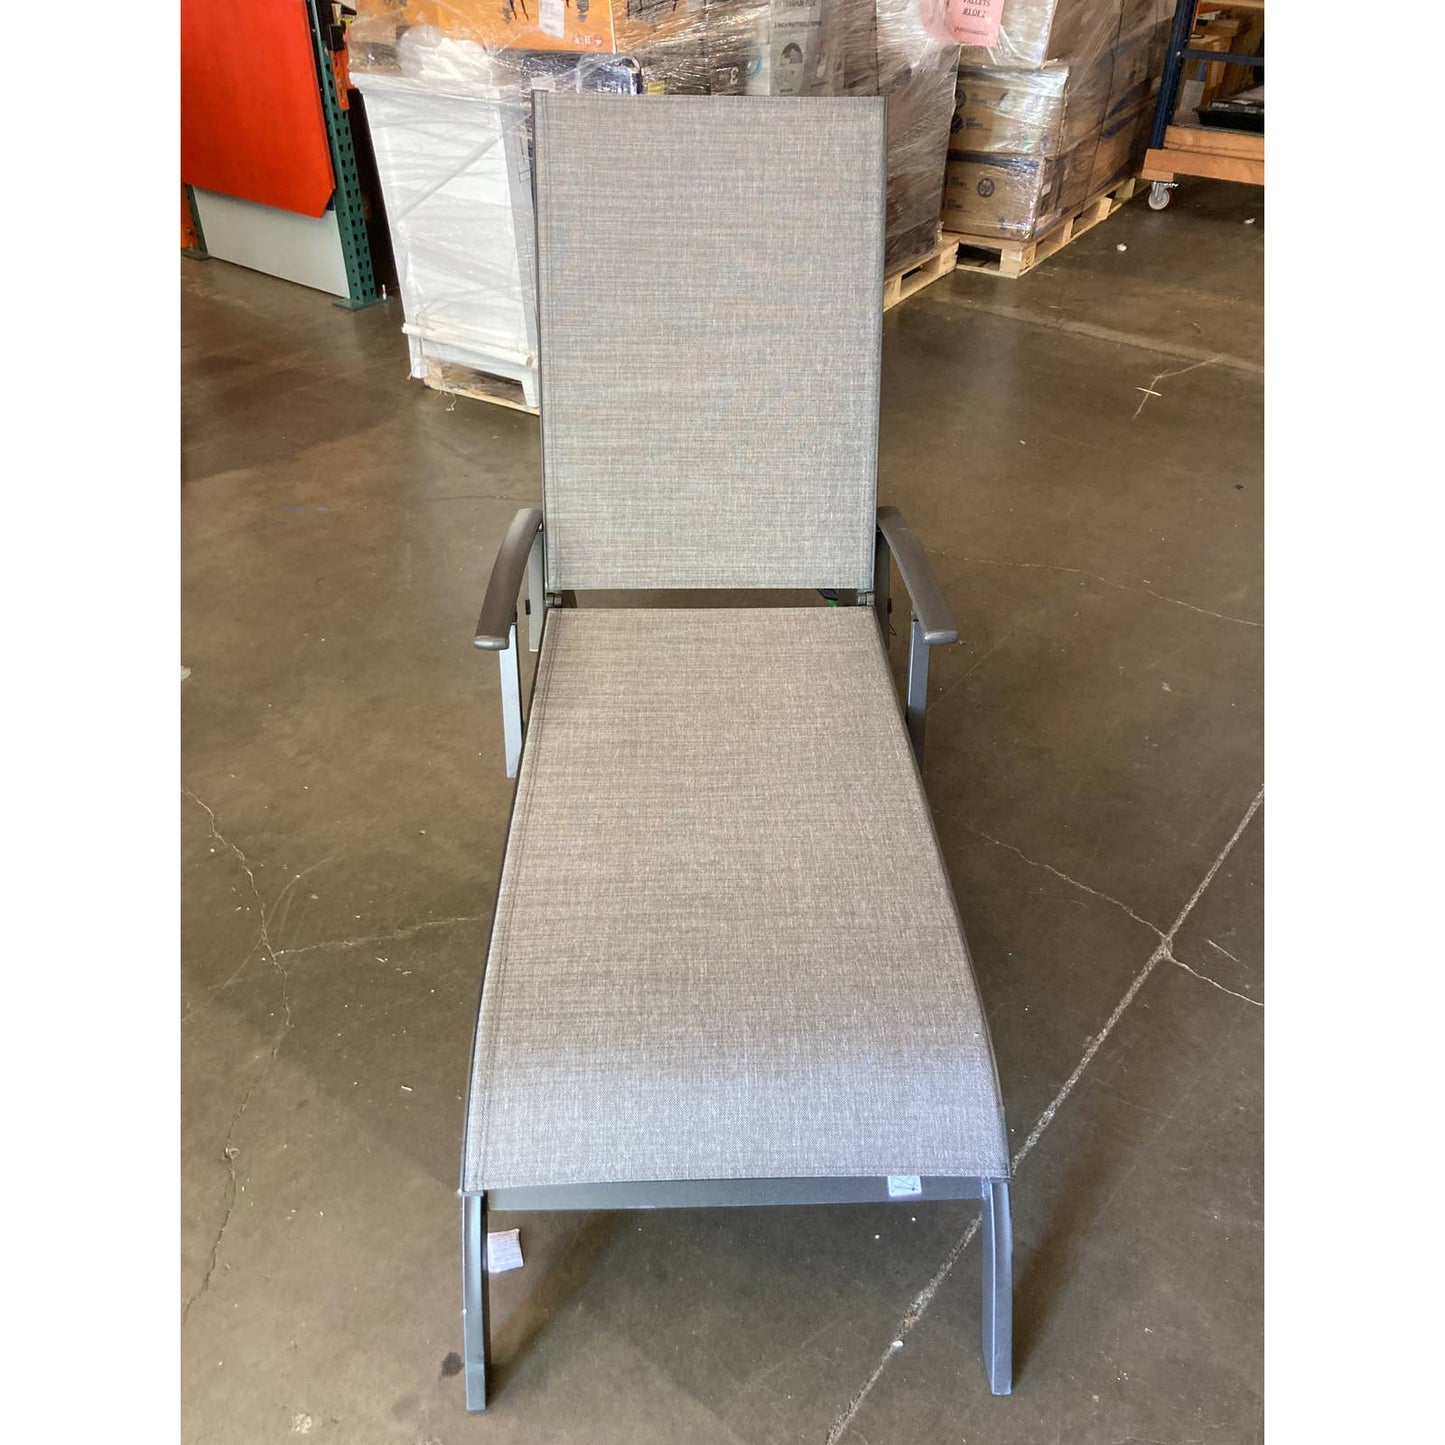 Costco - Agio Sling Chaise Lounge - Retail $185